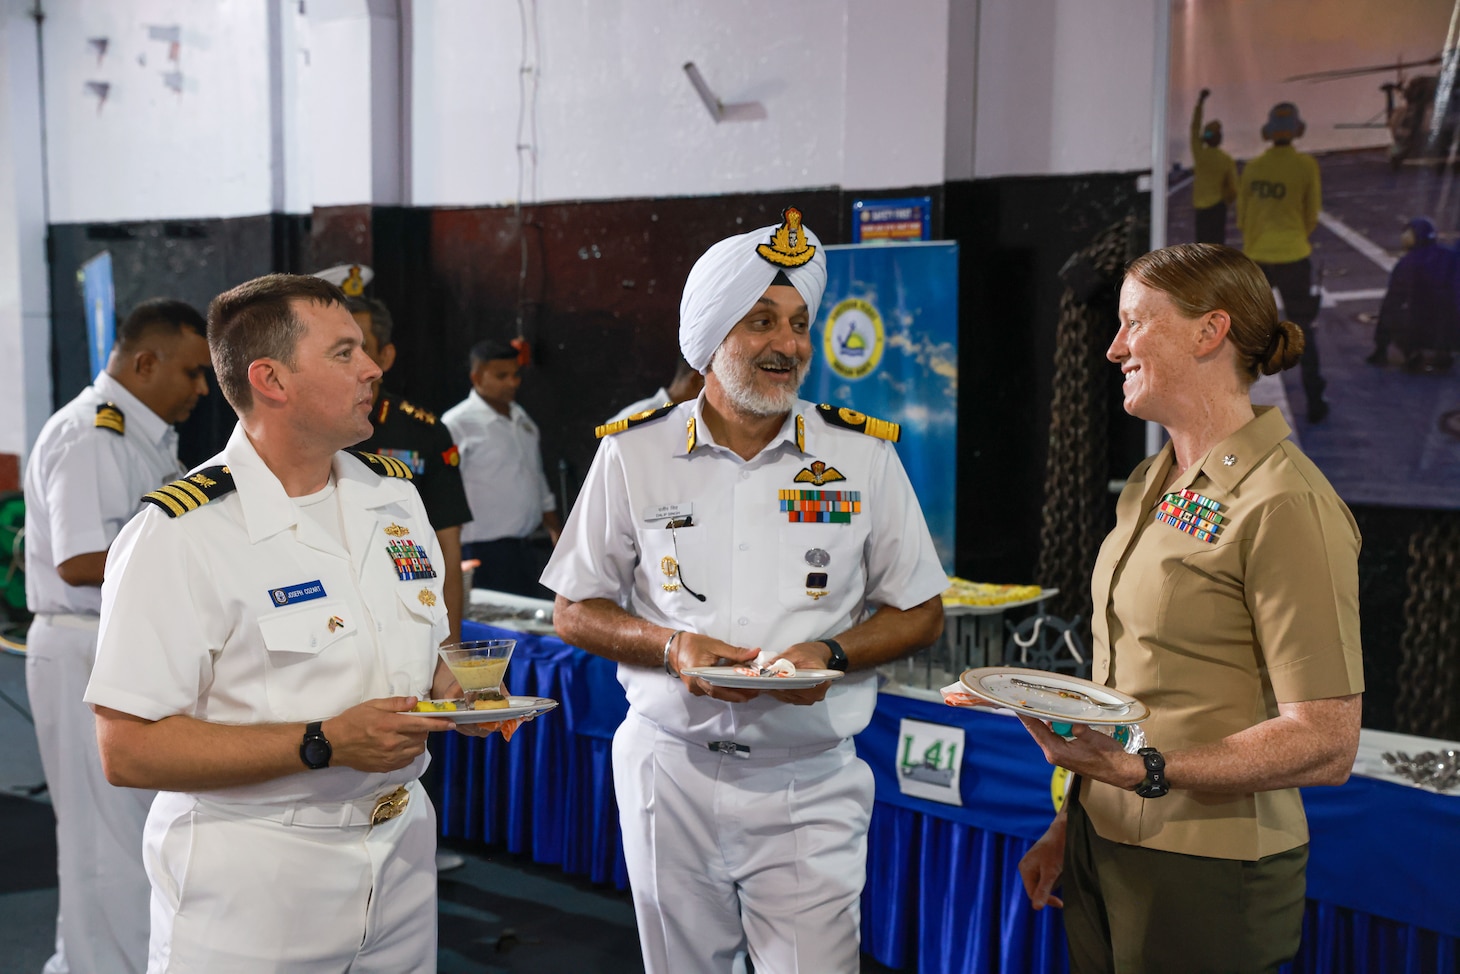 U.S. Marine Corps Lt. Col. Lindsay Mathwick, right, commanding officer of Combat Logistics Battalion 15, 15th Marine Expeditionary Unit, and the commander of troops aboard the amphibious transport dock USS Somerset (LPD 25), enjoys local Indian hors d’oeuvres with Cmdr. Joseph Cozart, left, assistant chief of staff for logistics, Expeditionary Strike Group 7 and Task Force 76/3, and Commodore Dalip Singh, commanding officer of Naval Air Station INS Dega, center, during the opening ceremony of Exercise Tiger TRIUMPH in Visakhapatnam, India, March 19, 2024. Tiger TRIUMPH is a U.S.-India tri-service amphibious exercise focused on humanitarian assistance and disaster relief readiness and interoperability. Tiger TRIUMPH enables U.S. and Indian Armed Forces to improve interoperability and bilateral, joint, and service readiness in the Indian Ocean region and beyond to better achieve mutual regional security objectives. (U.S. Marine Corps photo by Cpl. Aidan Hekker)